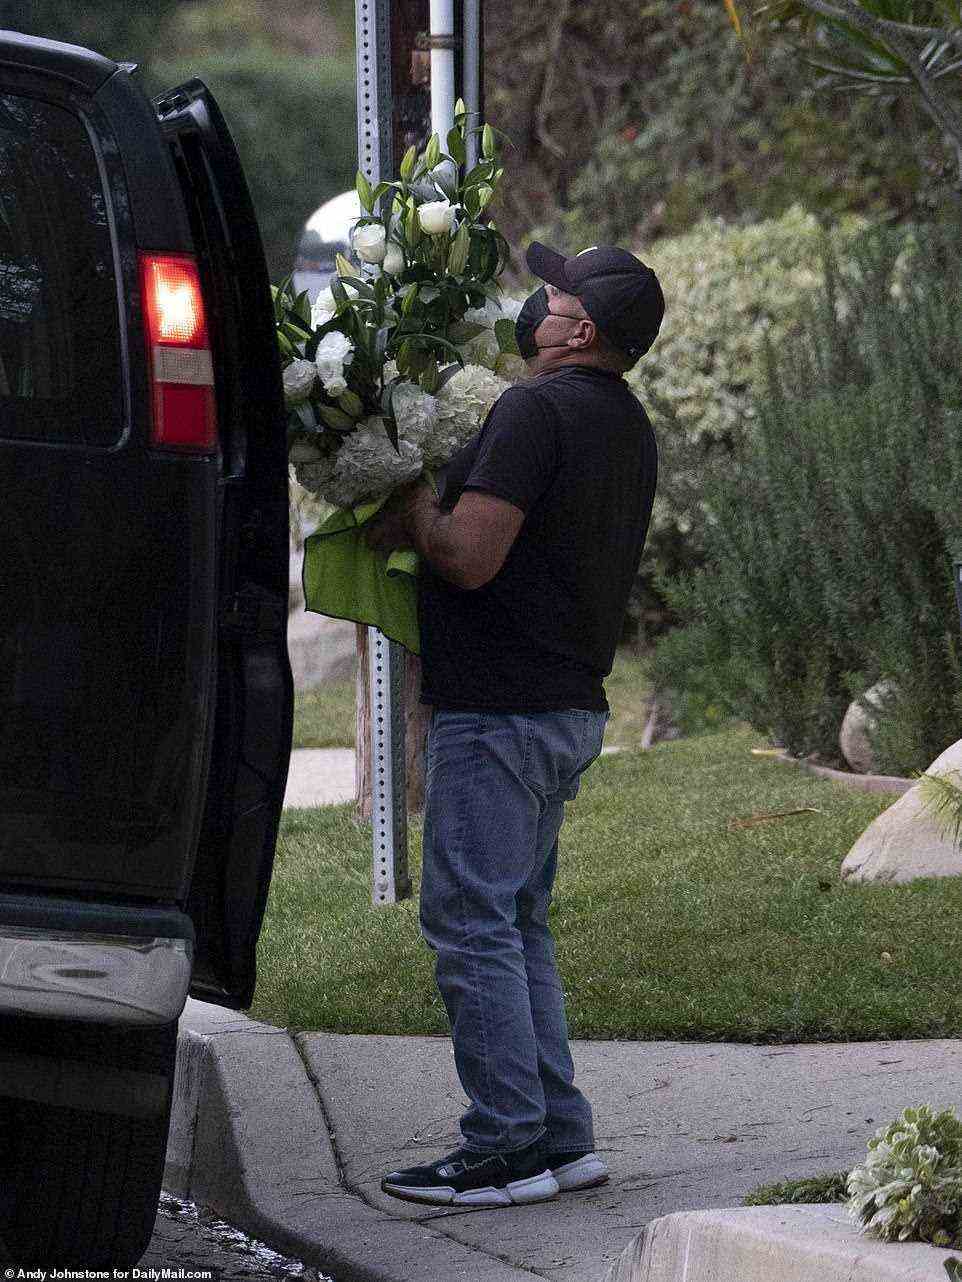 A man is seen carrying a large arrangement of flowers that appear to be for the private funeral service outside the couple's home